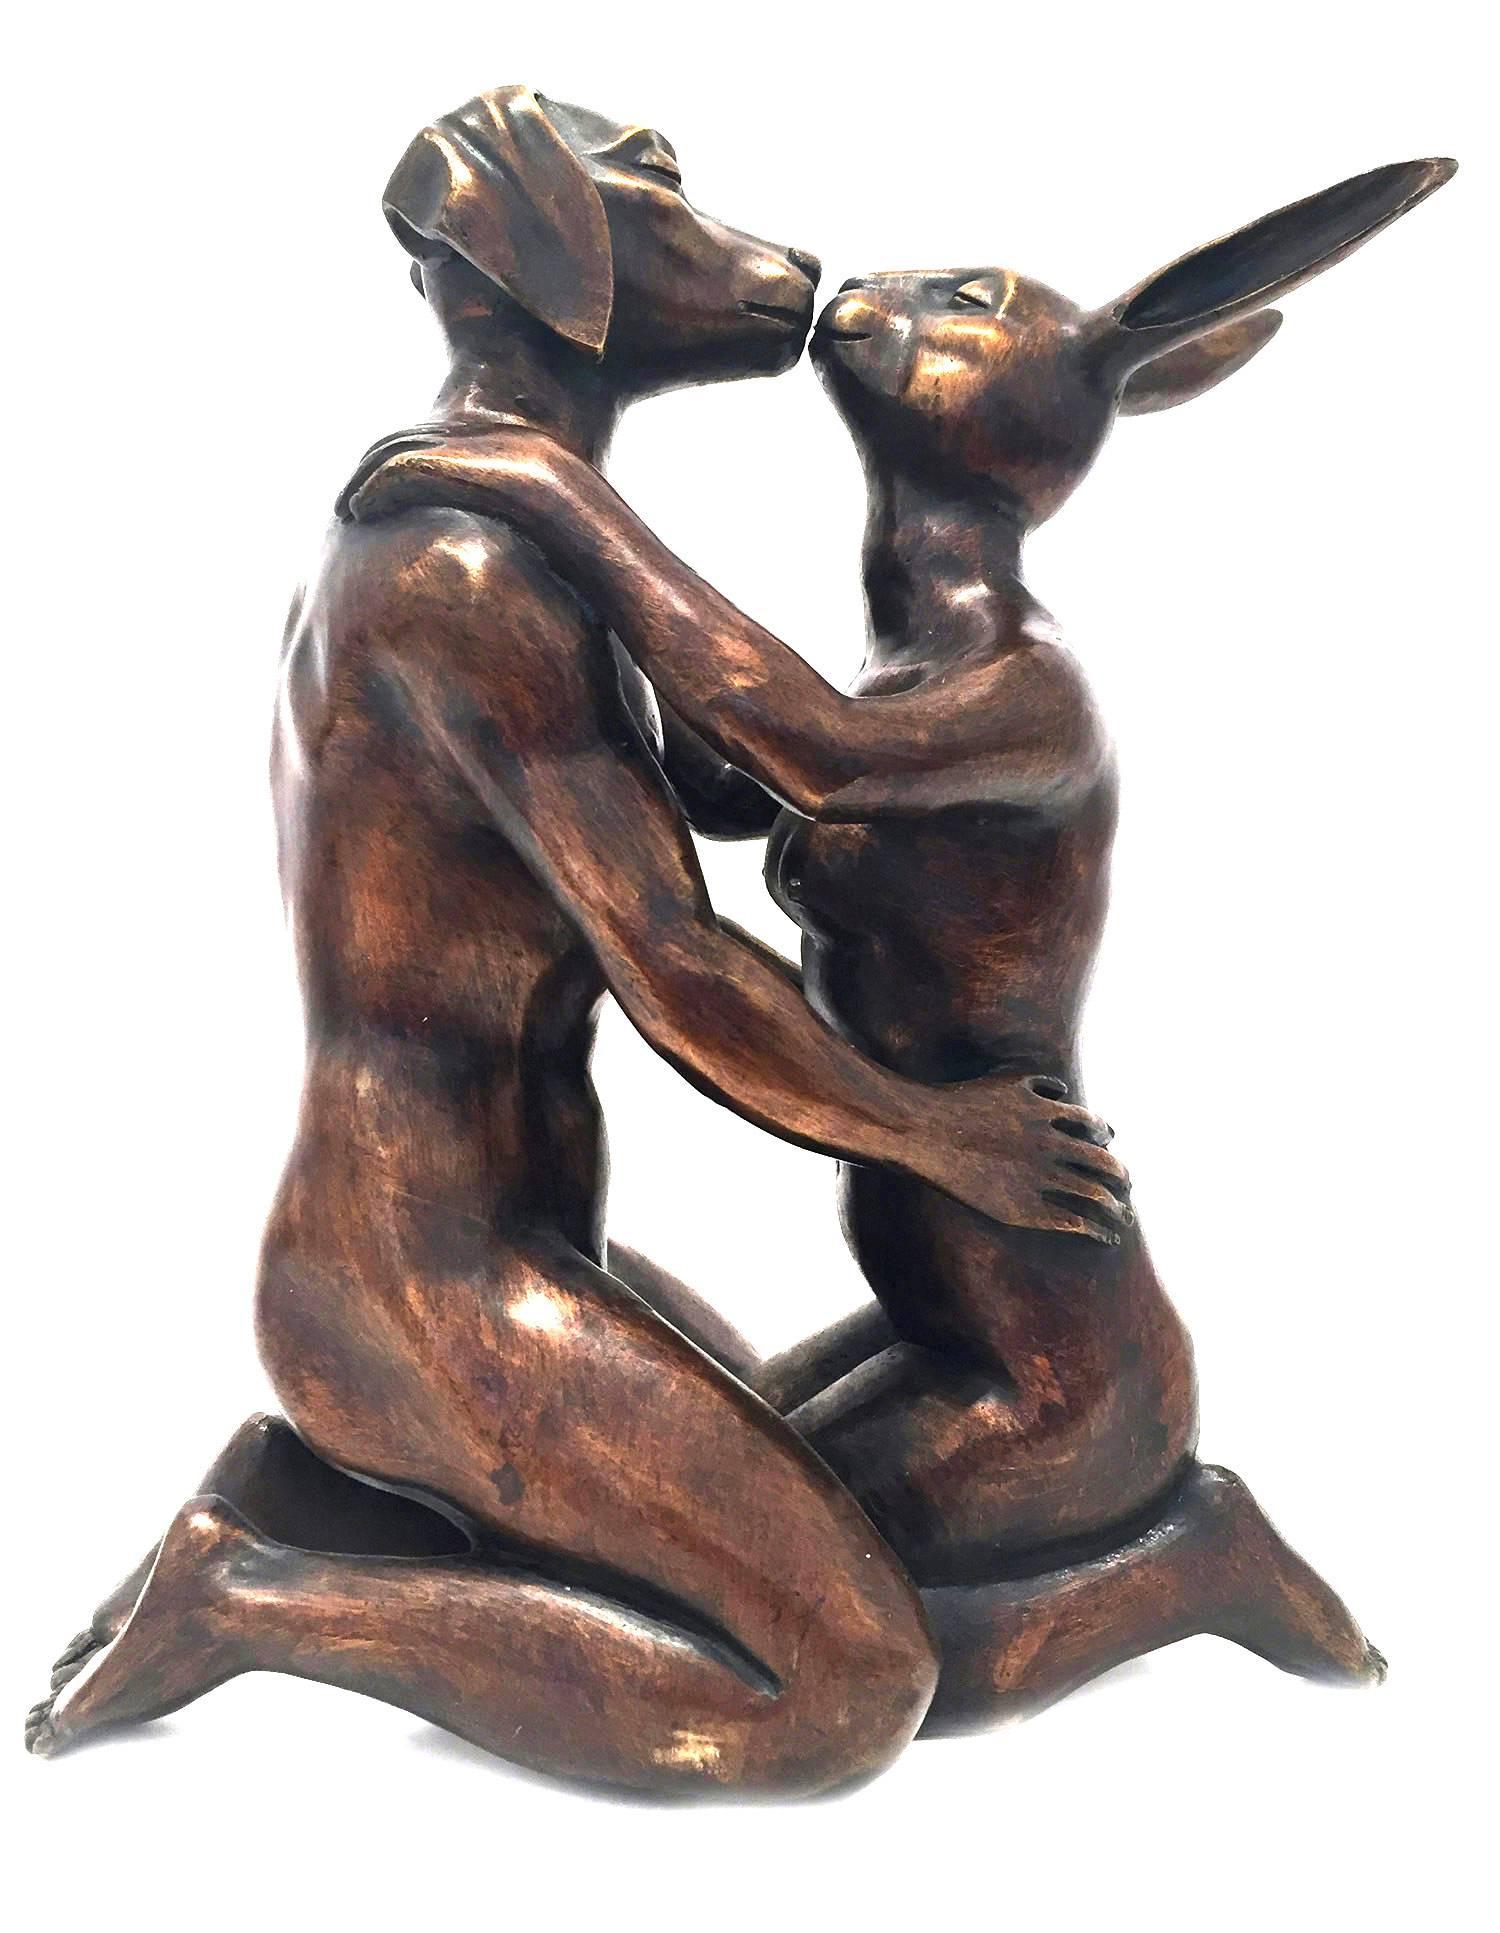 Gillie and Marc Schattner Figurative Sculpture - She hoped this Kiss would Last Forever (Weim and Rabbit)